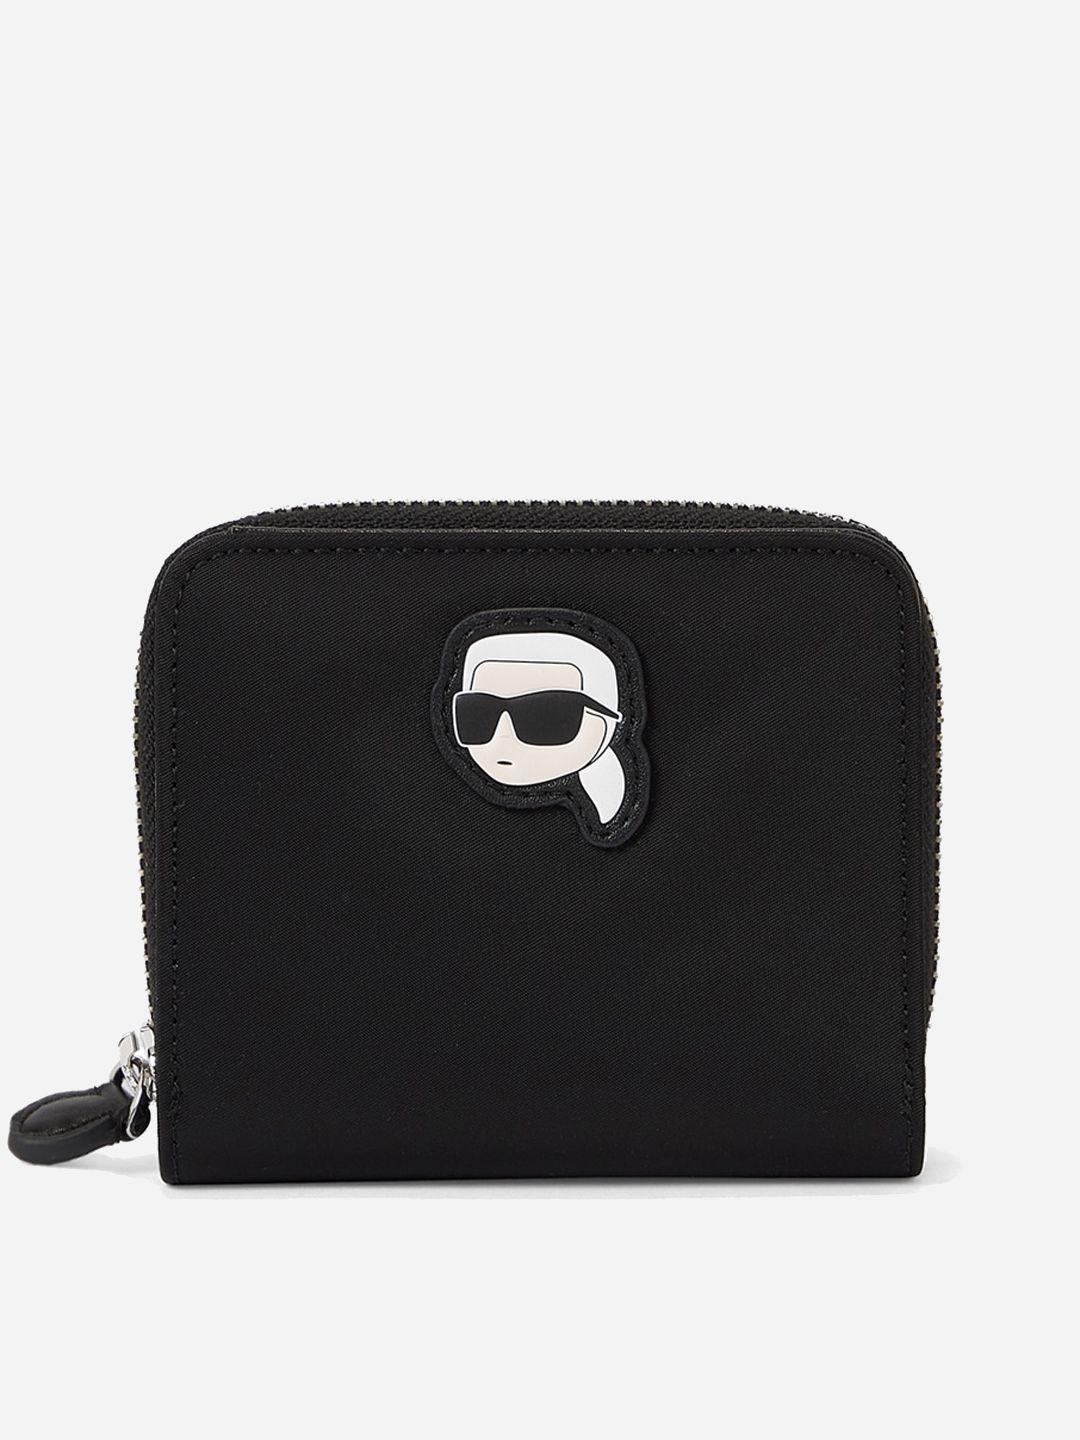 karl lagerfeld black pu structured sling bag with applique